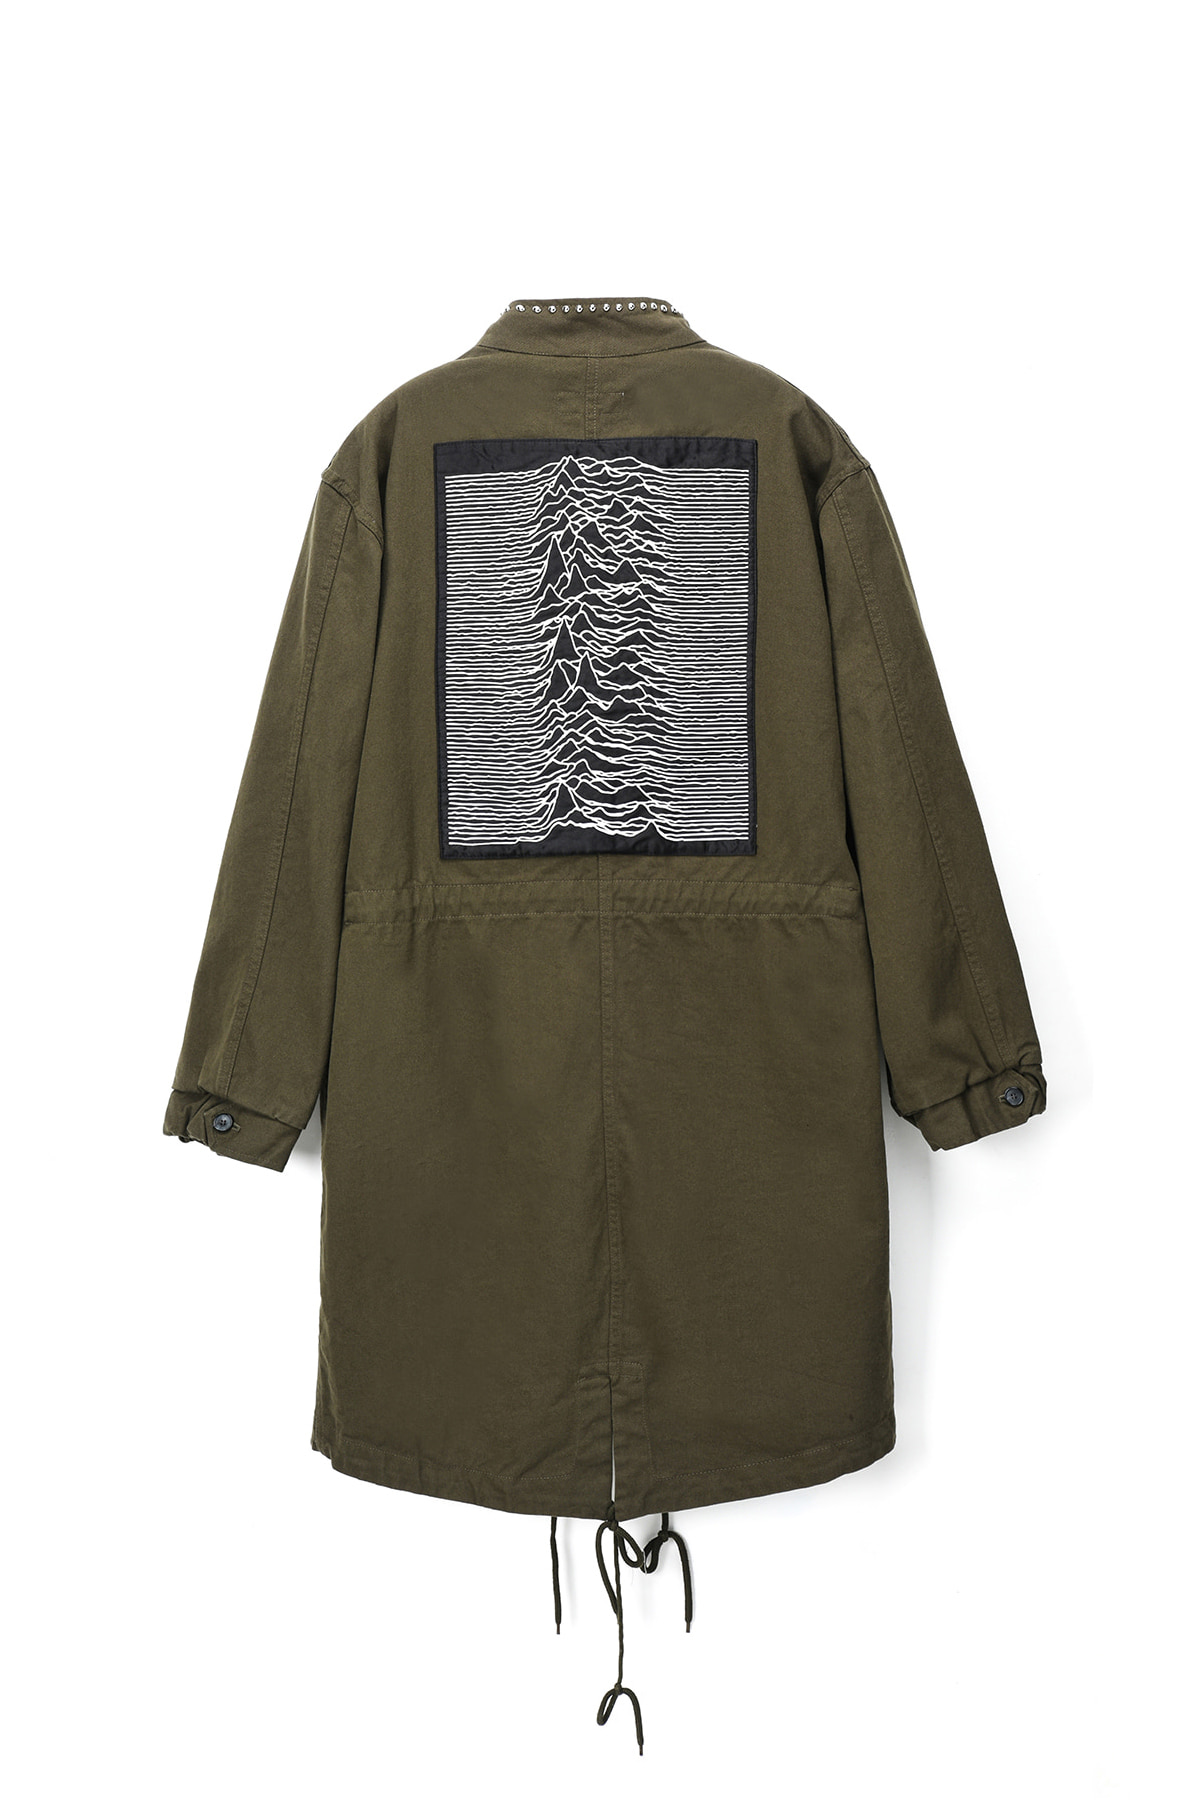 UNKNOWN PLEASURES EMBROIDERED STUDS MODS PARKA IN COTTON TWILL KHAKI